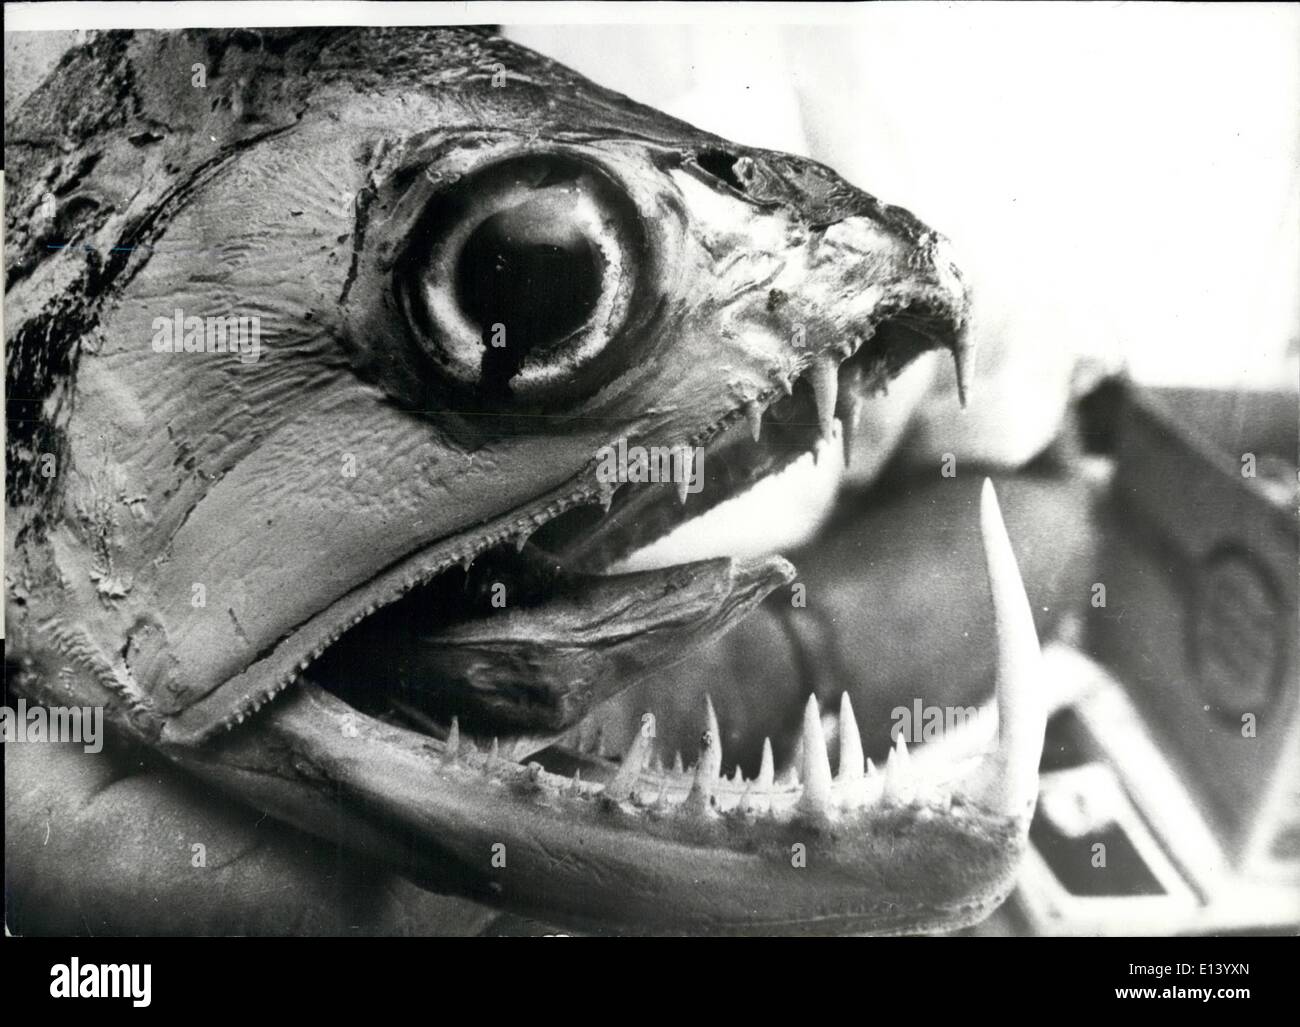 Mar. 27, 2012 - Name wanted for grotesque new fish Hitherto unseen by man, this grotesque fish is the latest discovery on our planet. The mini-monster with its fearsome mouthful of teeth was caught during a safari in a remote river of Brazil. The fish is as yet unnamed. Stock Photo